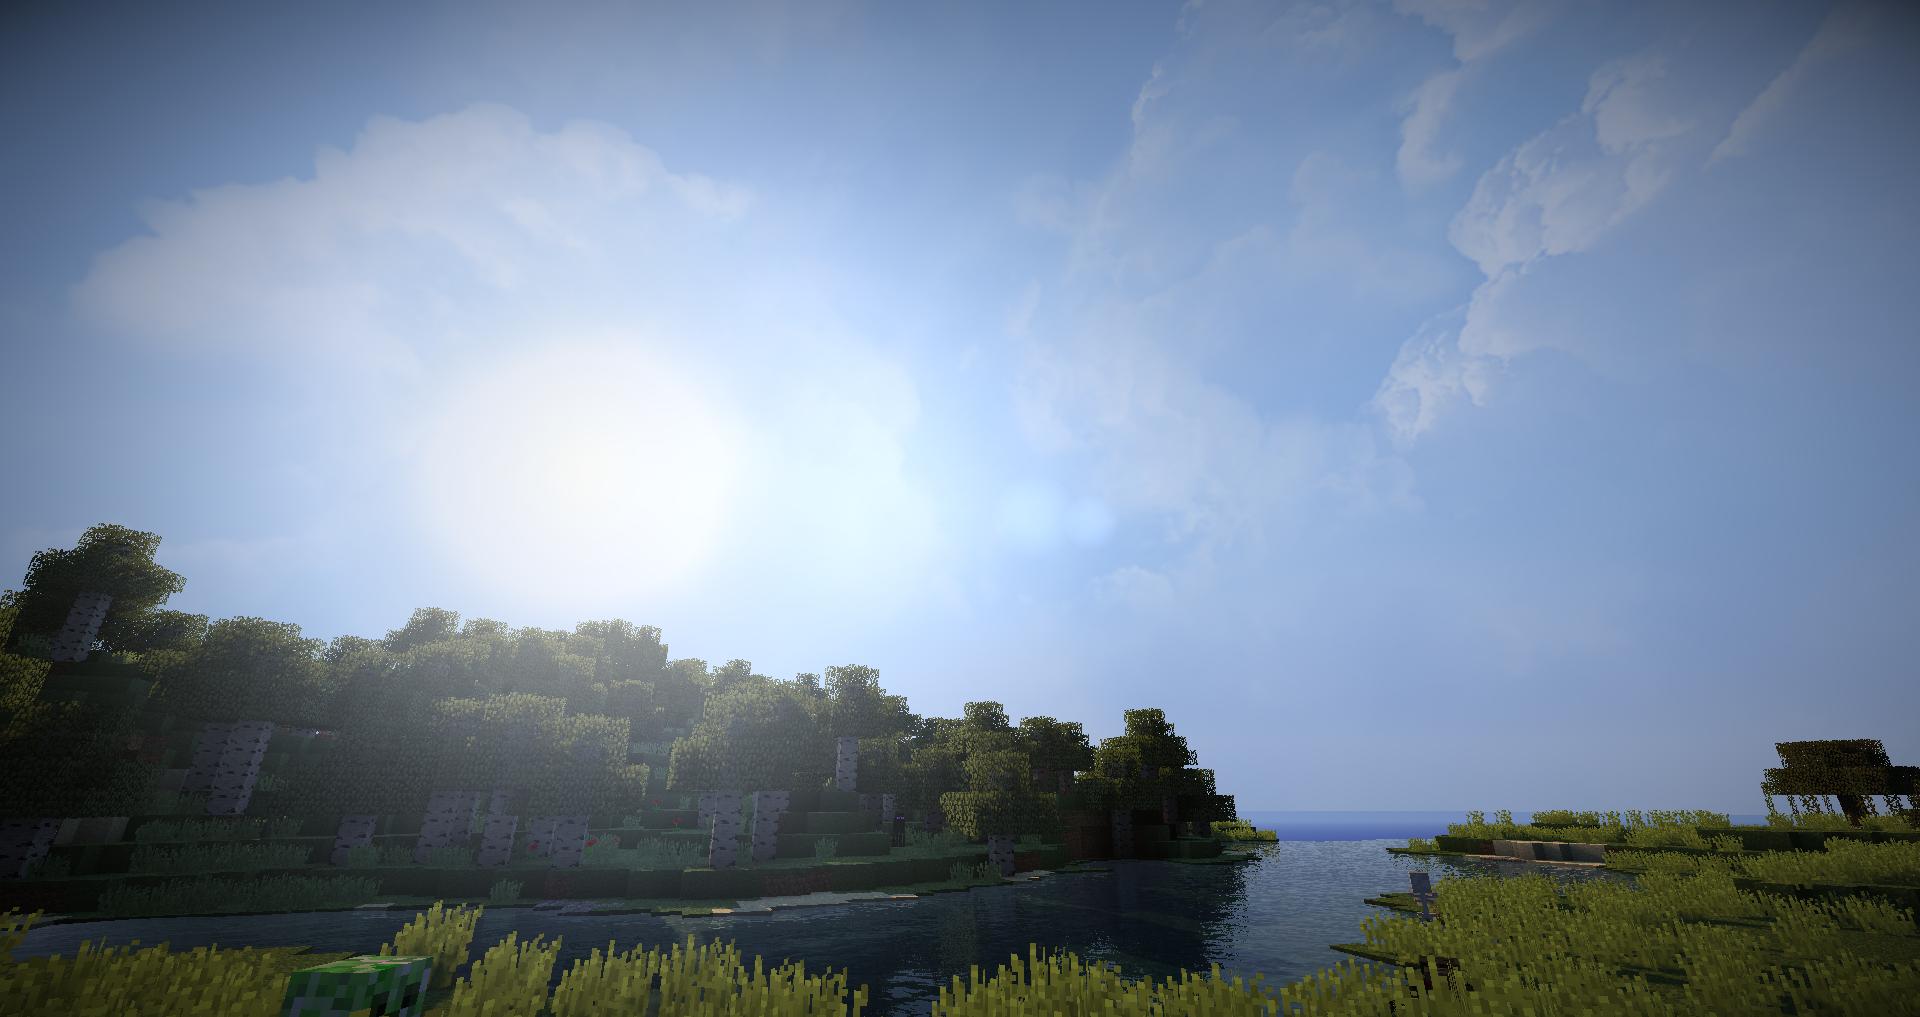 shaders texture pack 1.18.1